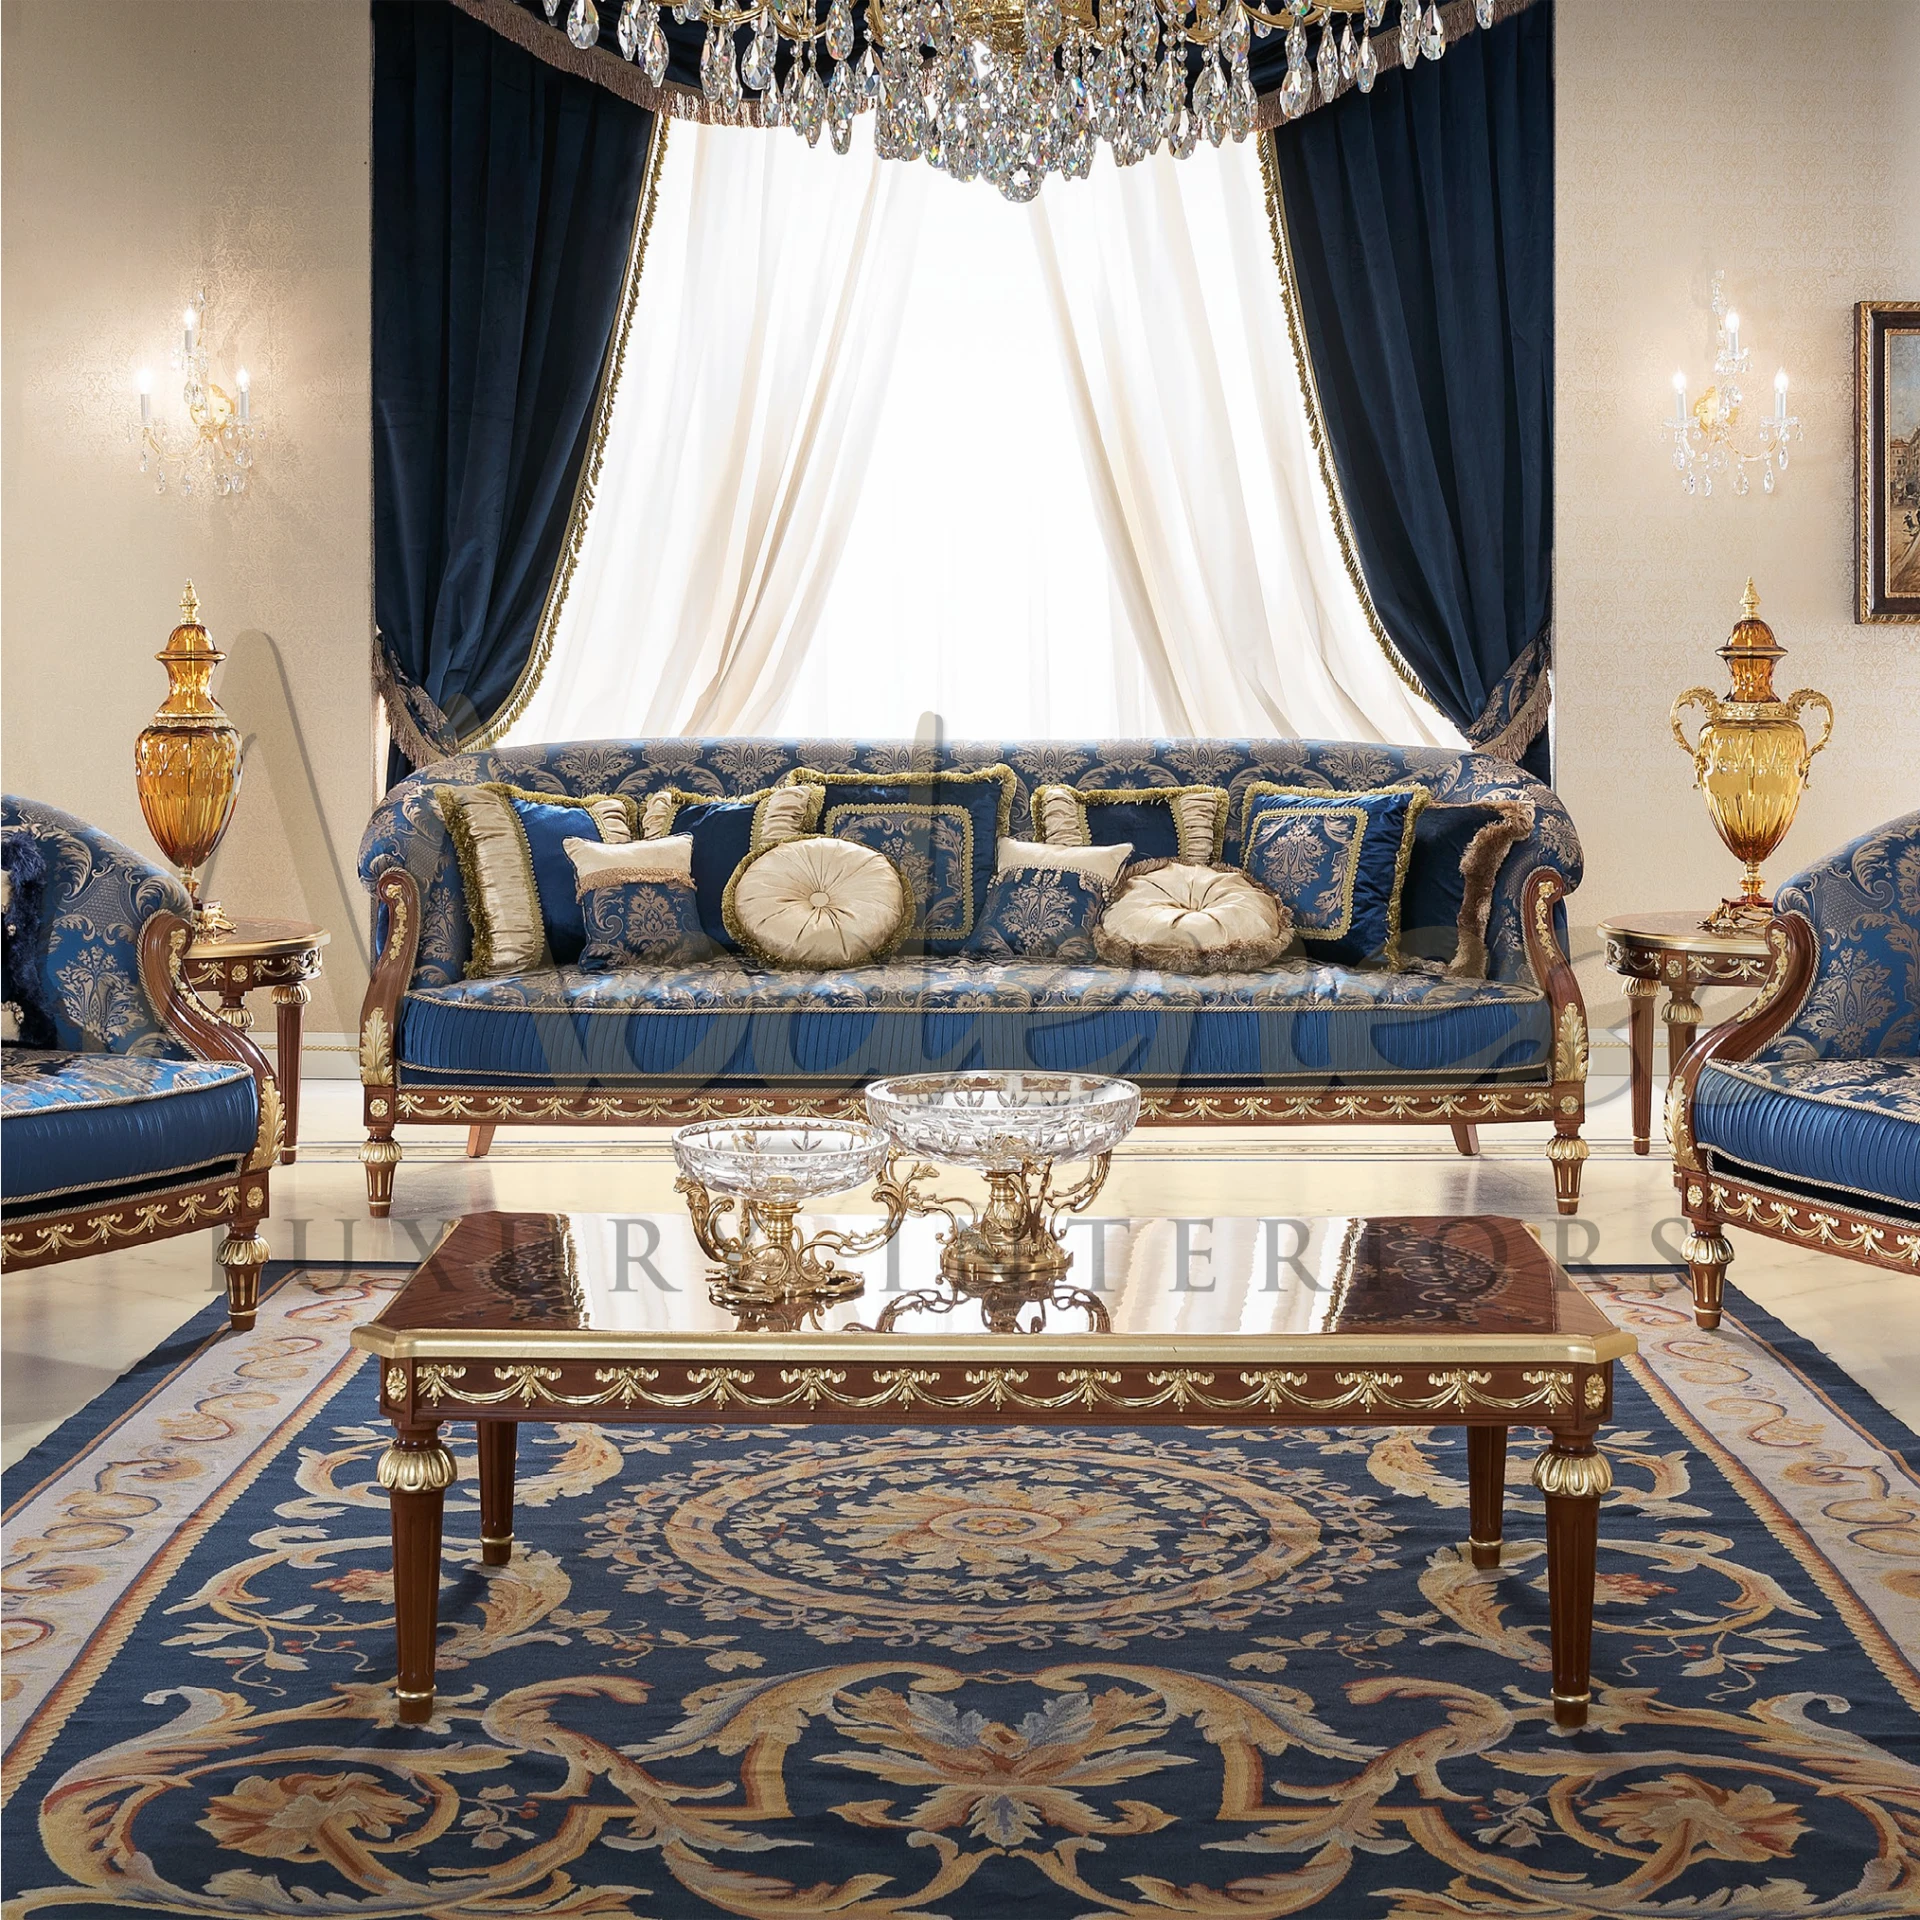 Luxurious Baroque Blue Cushion, a masterpiece of Italian textiles, with dramatic flourishes and detailed Baroque-style motifs.